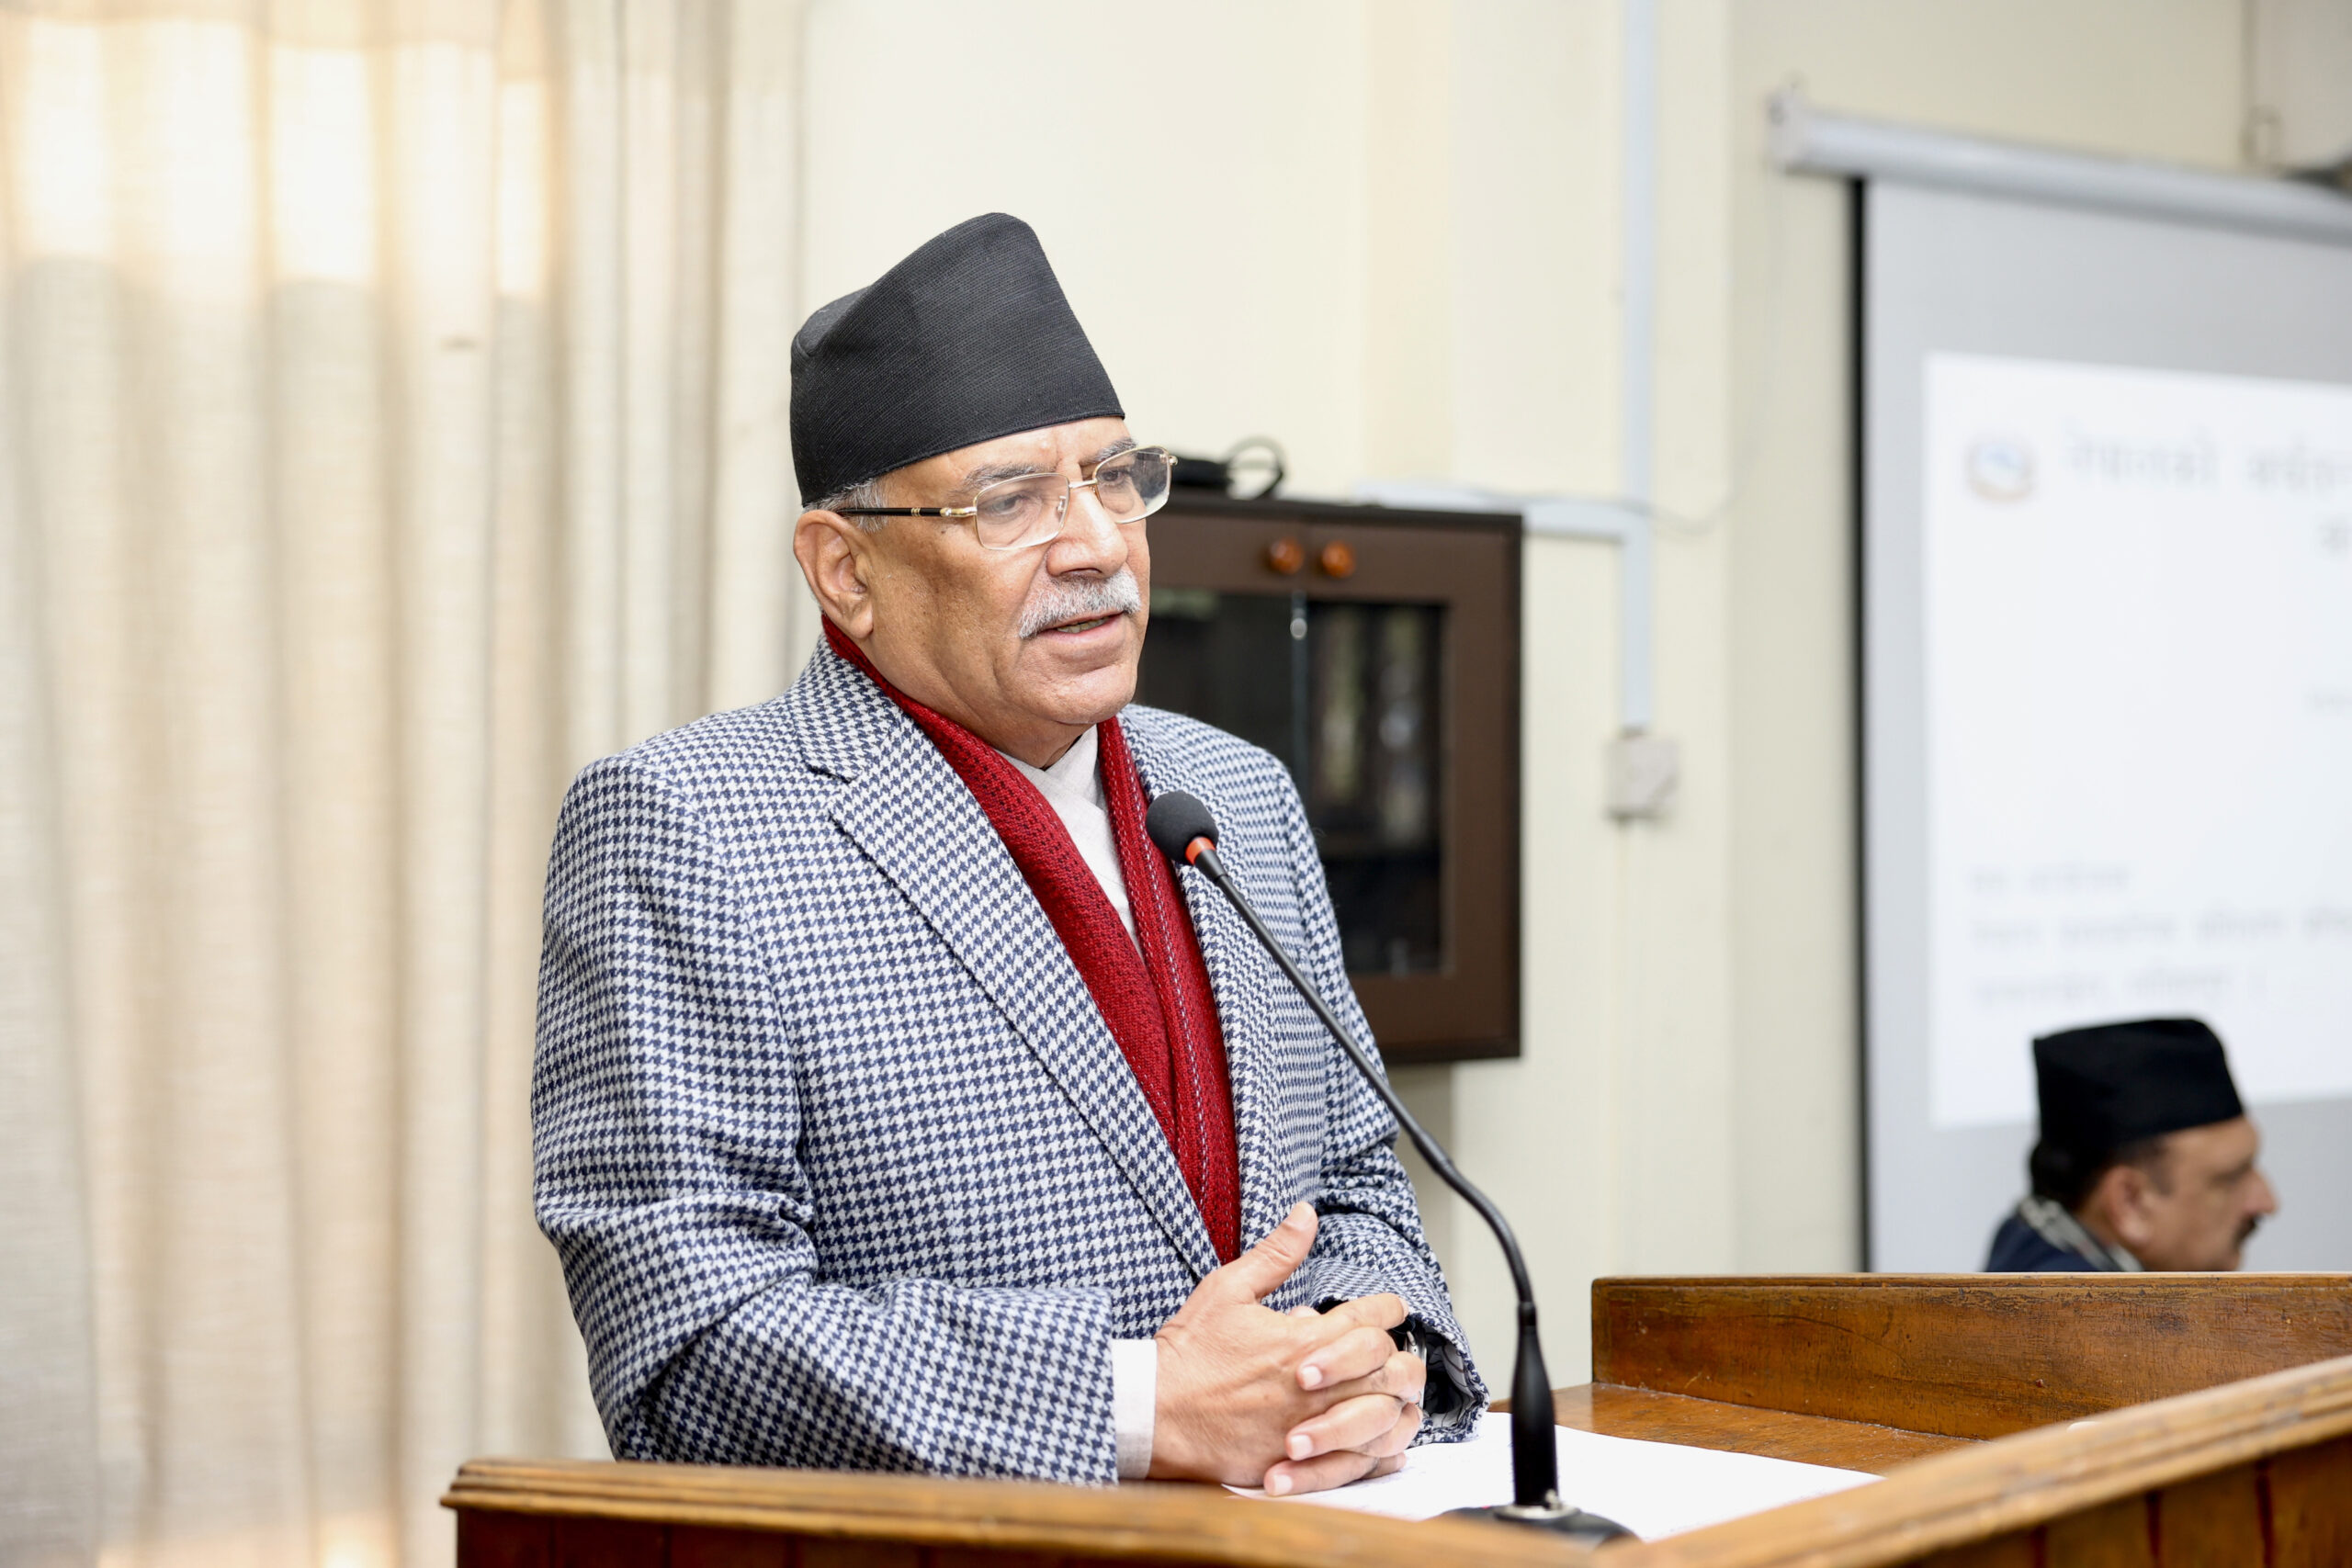 PM Dahal emphasizes quality service in shaping public perception